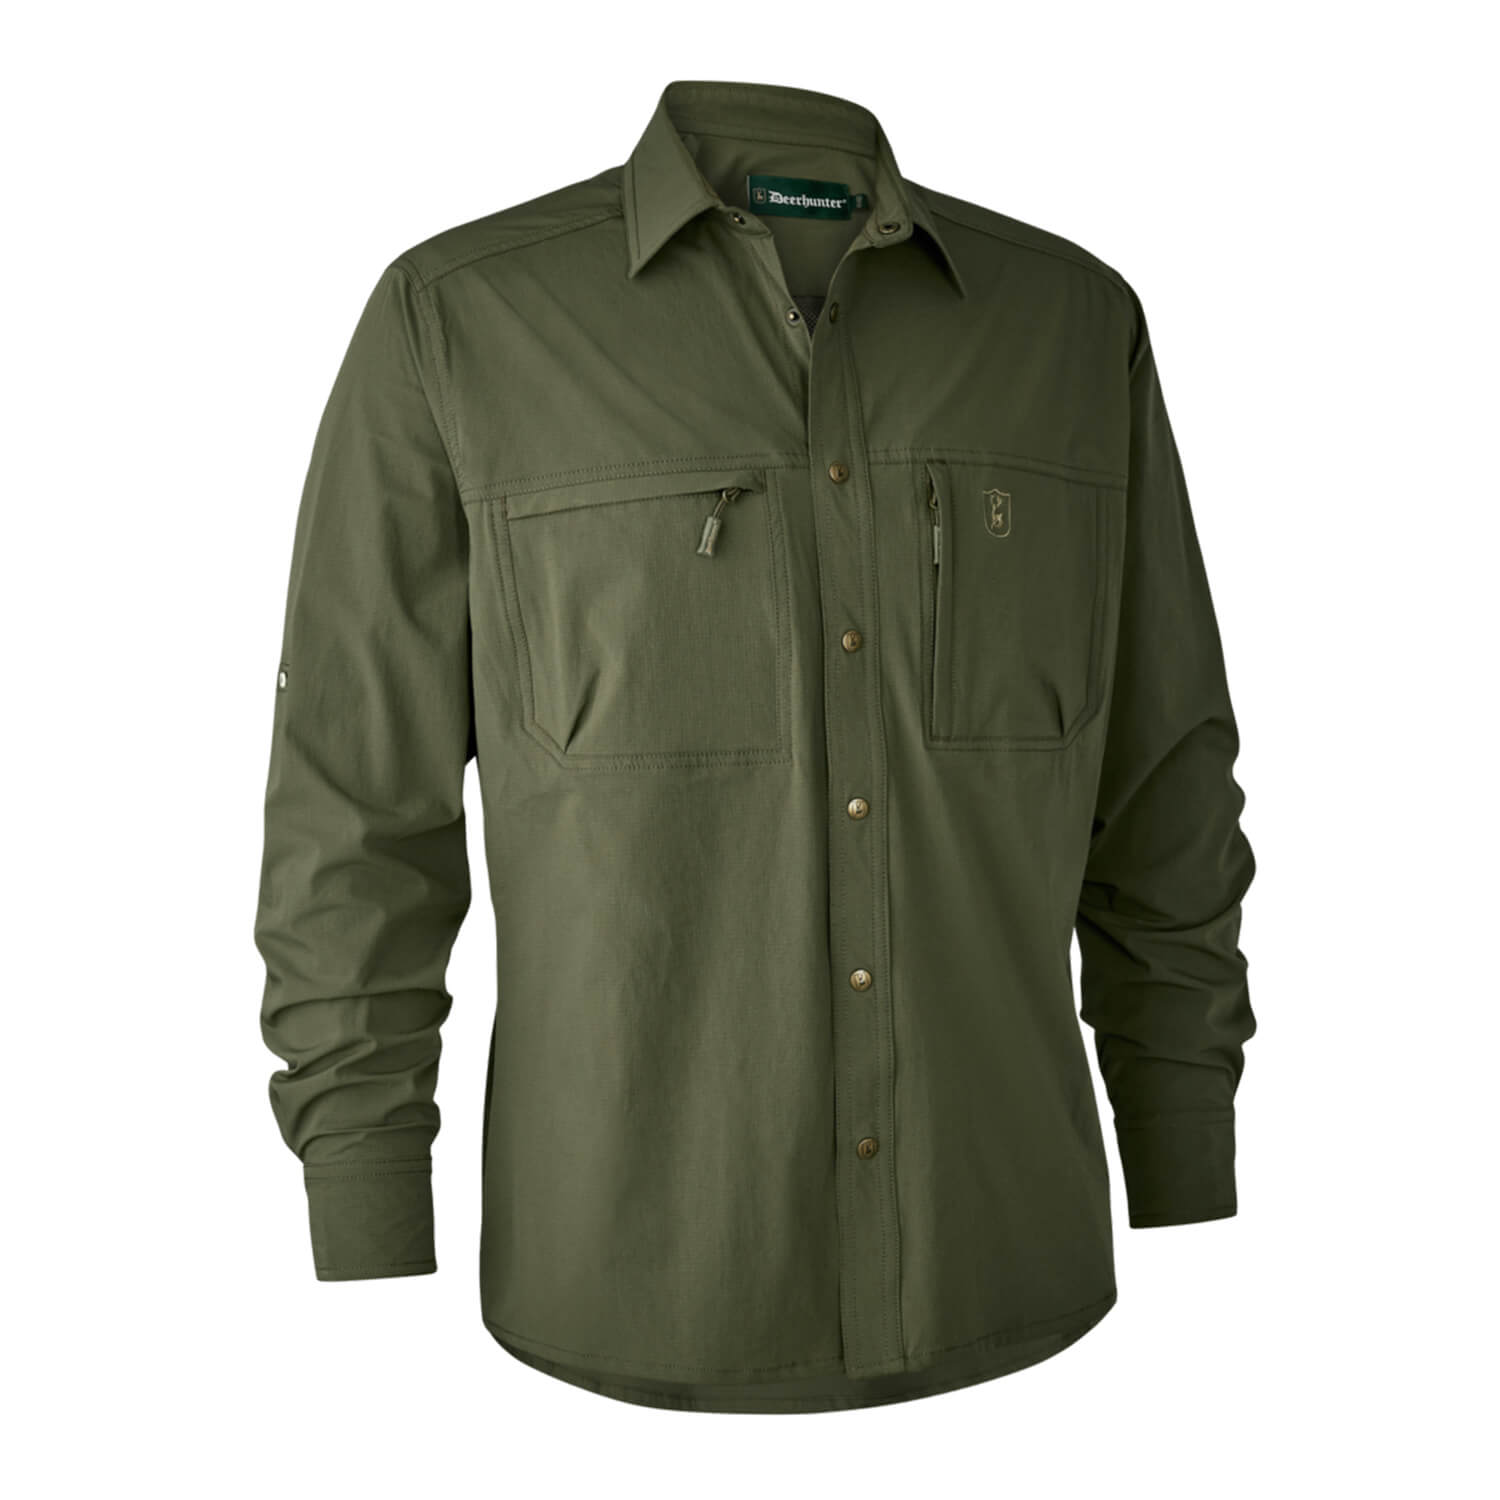 Deerhunter Hunting Shirt Anti-Insect - Insect Protection